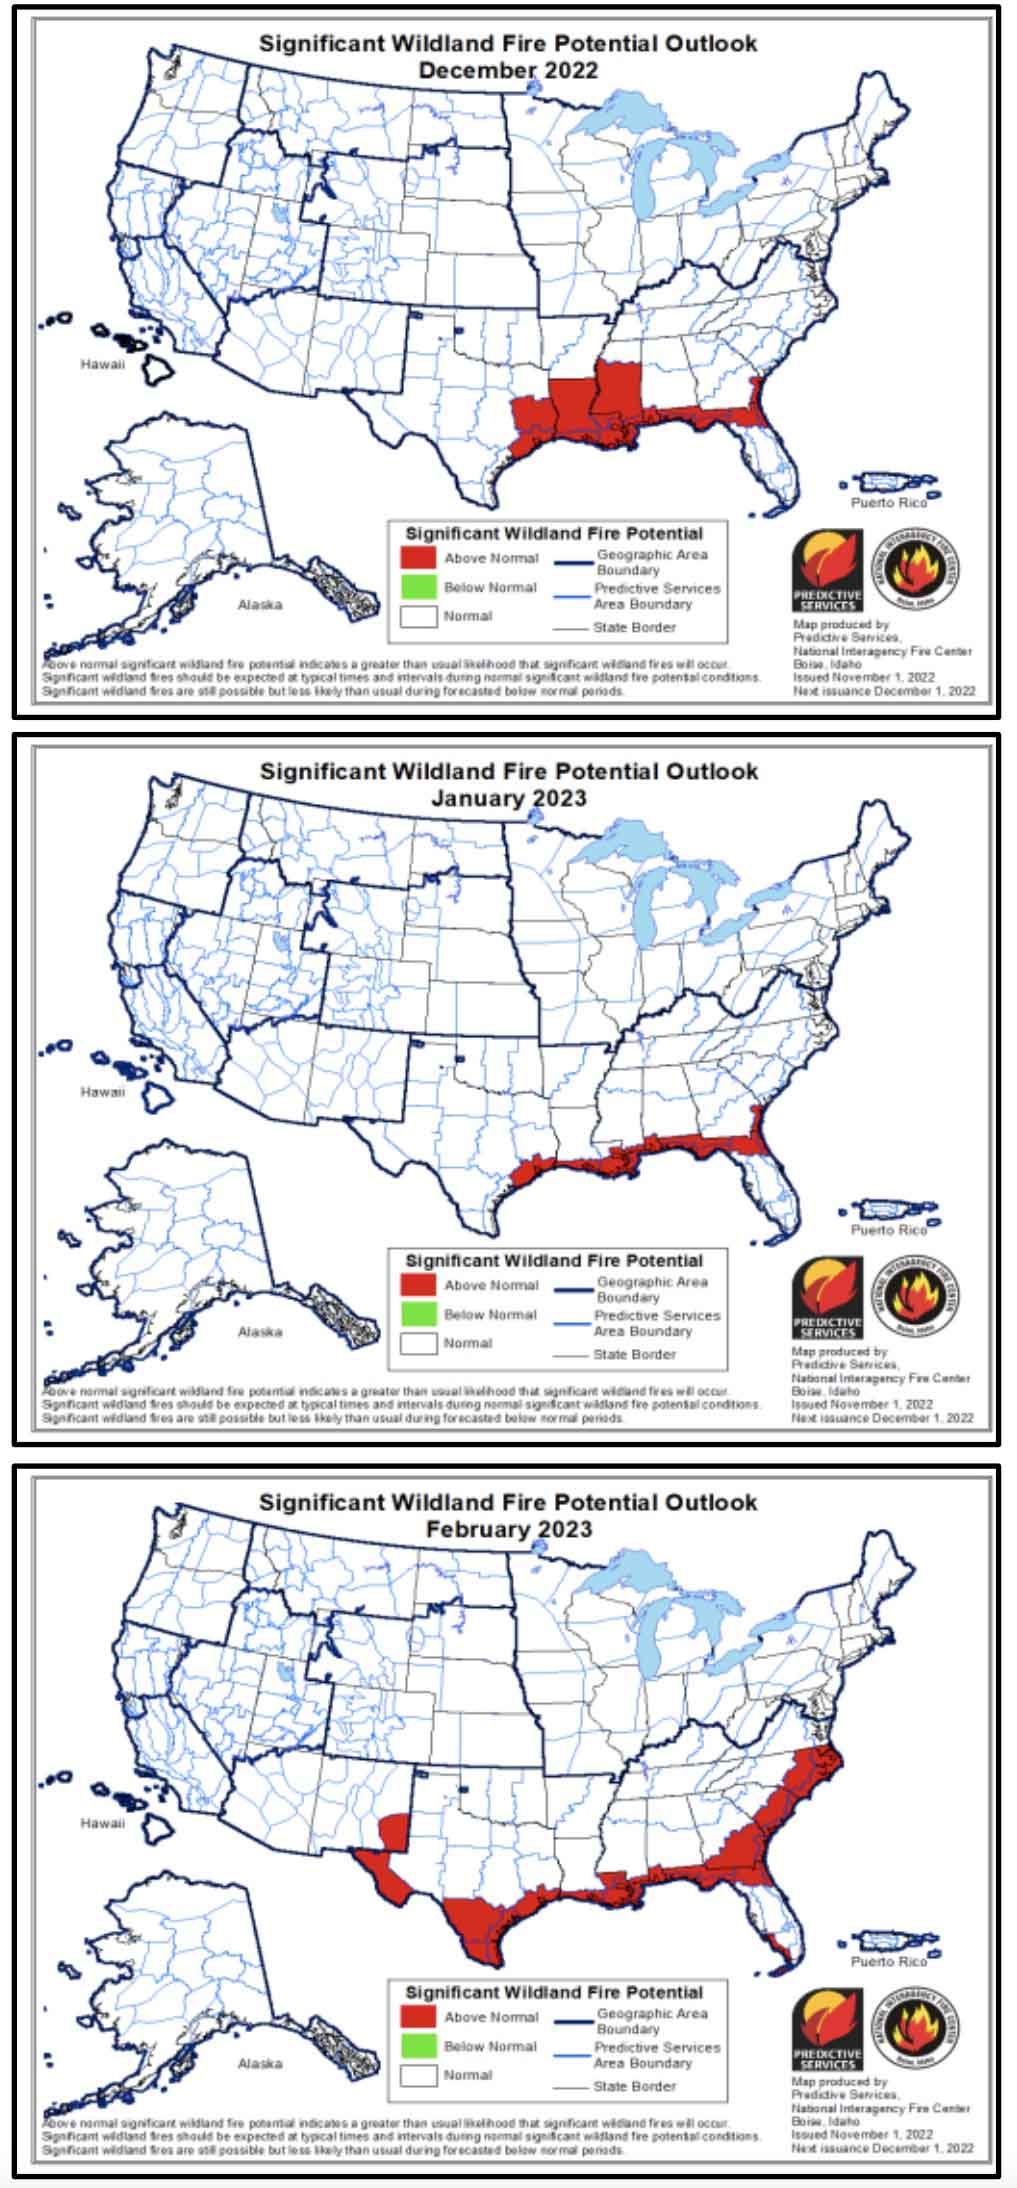 Wildfire Outlook, December through February